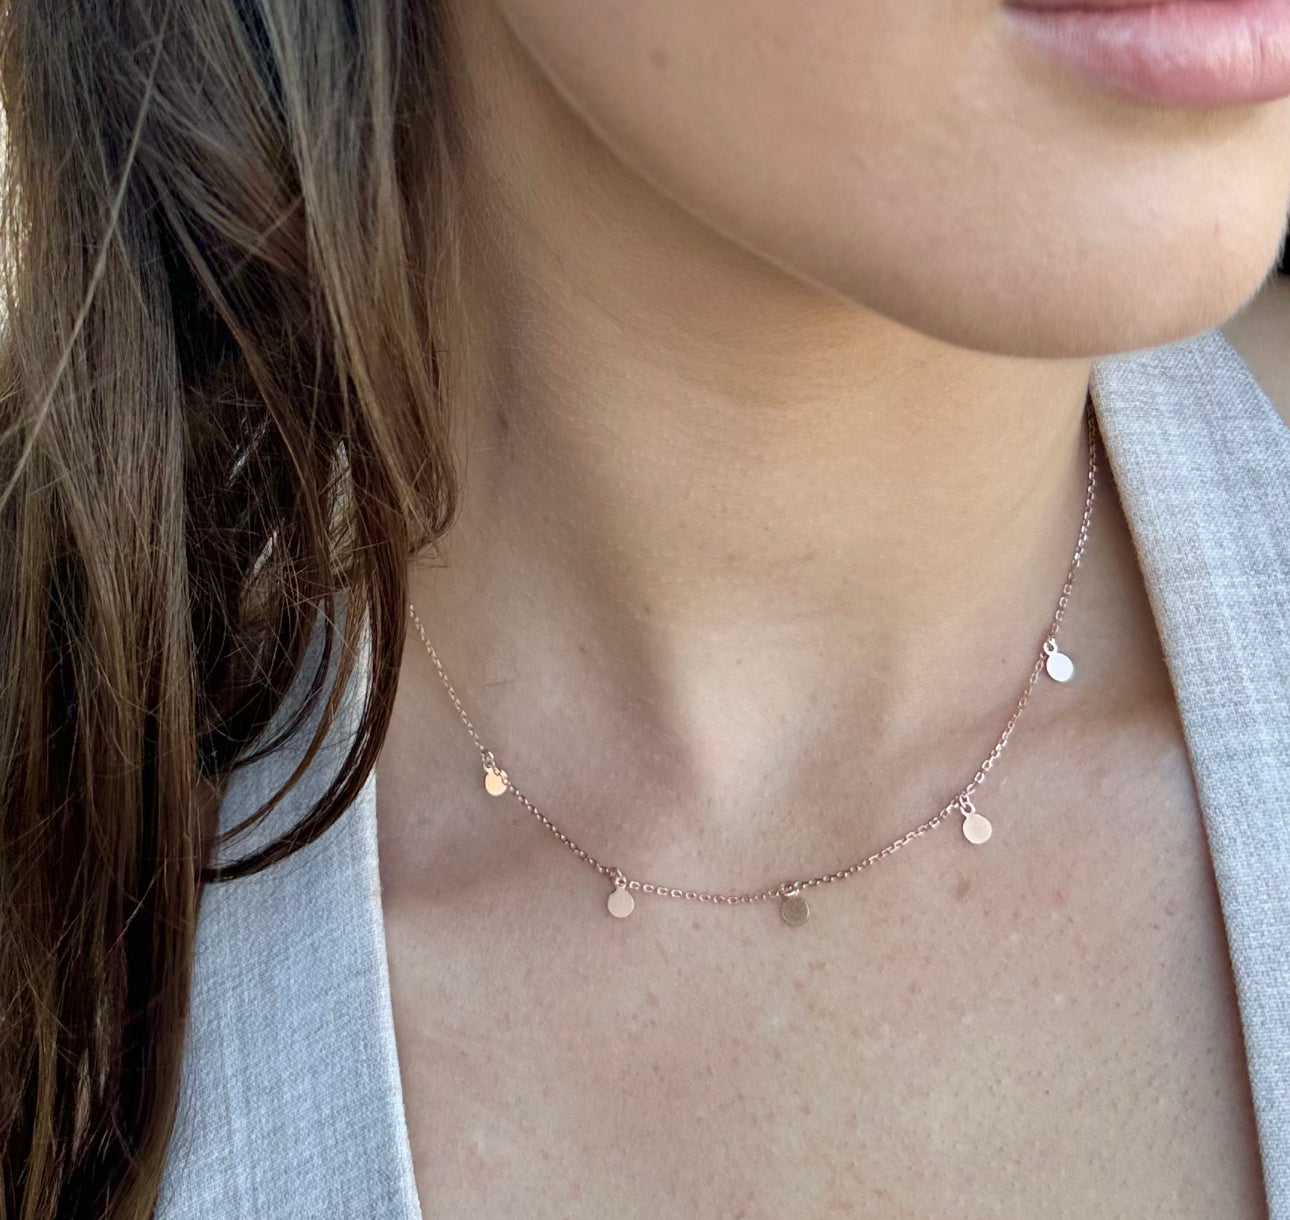 Indie Necklace - Blush & Co. Rose Gold Jewellery Australia